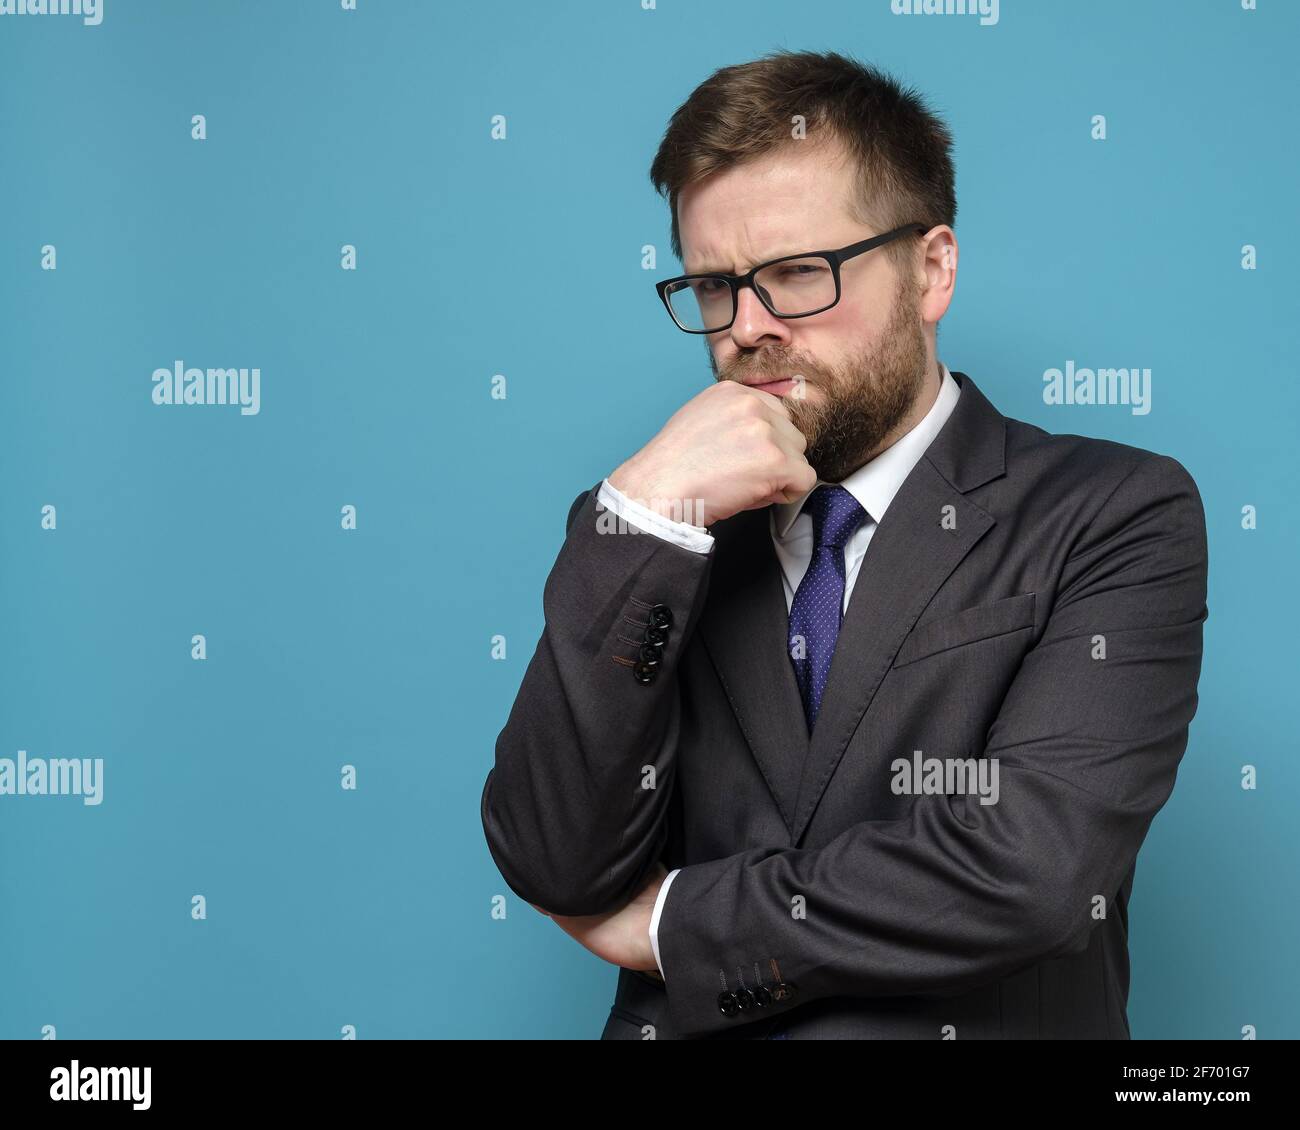 Suspicious, pensive business man in a suit and glasses looks sternly, holding hand to his face. Copy space. Blue background. Stock Photo